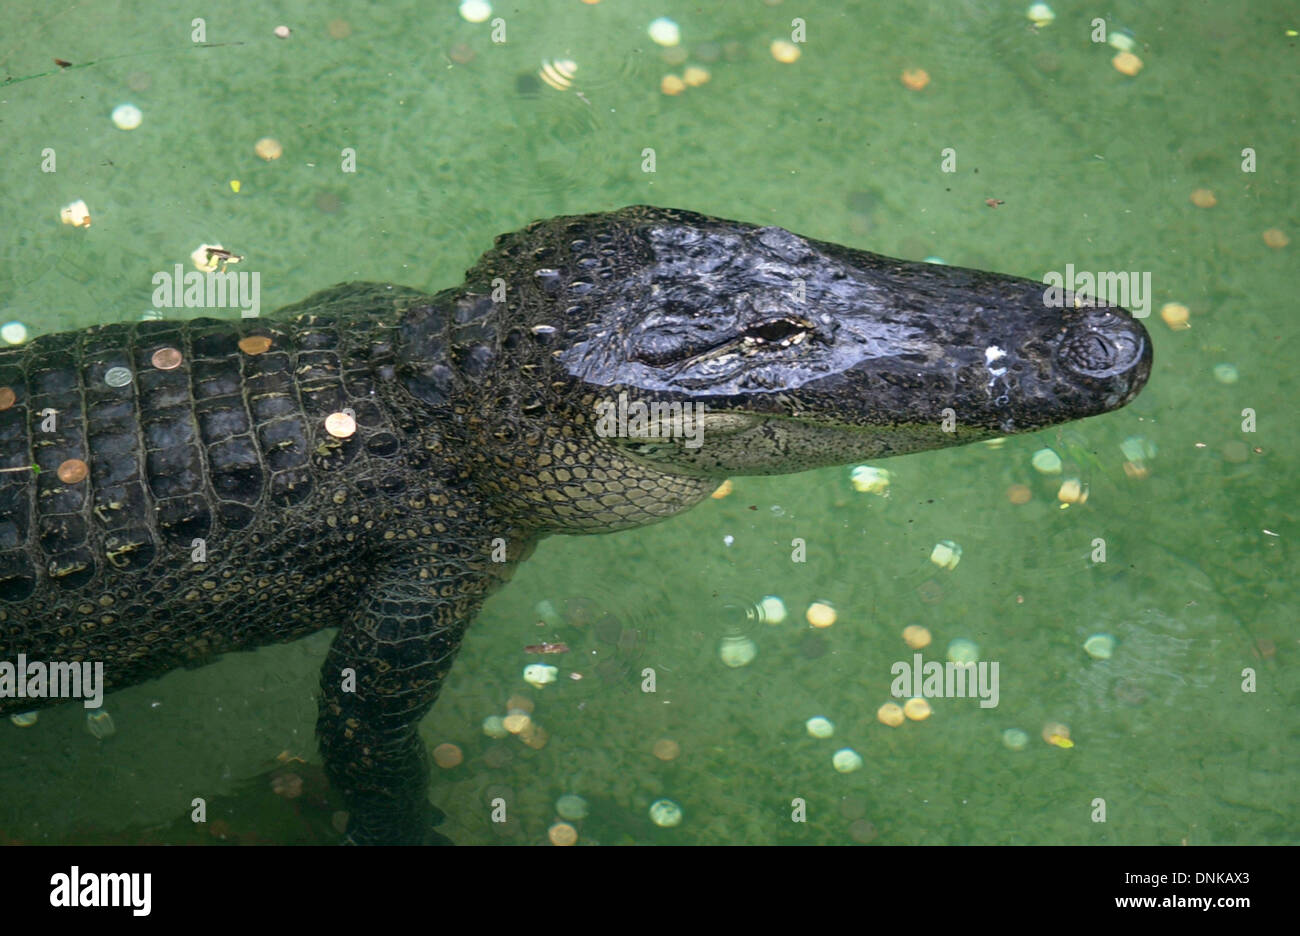 Coins thrown by people for good luck cover the scales of an alligator in Brownsville's Zoo in Texas, USA Stock Photo